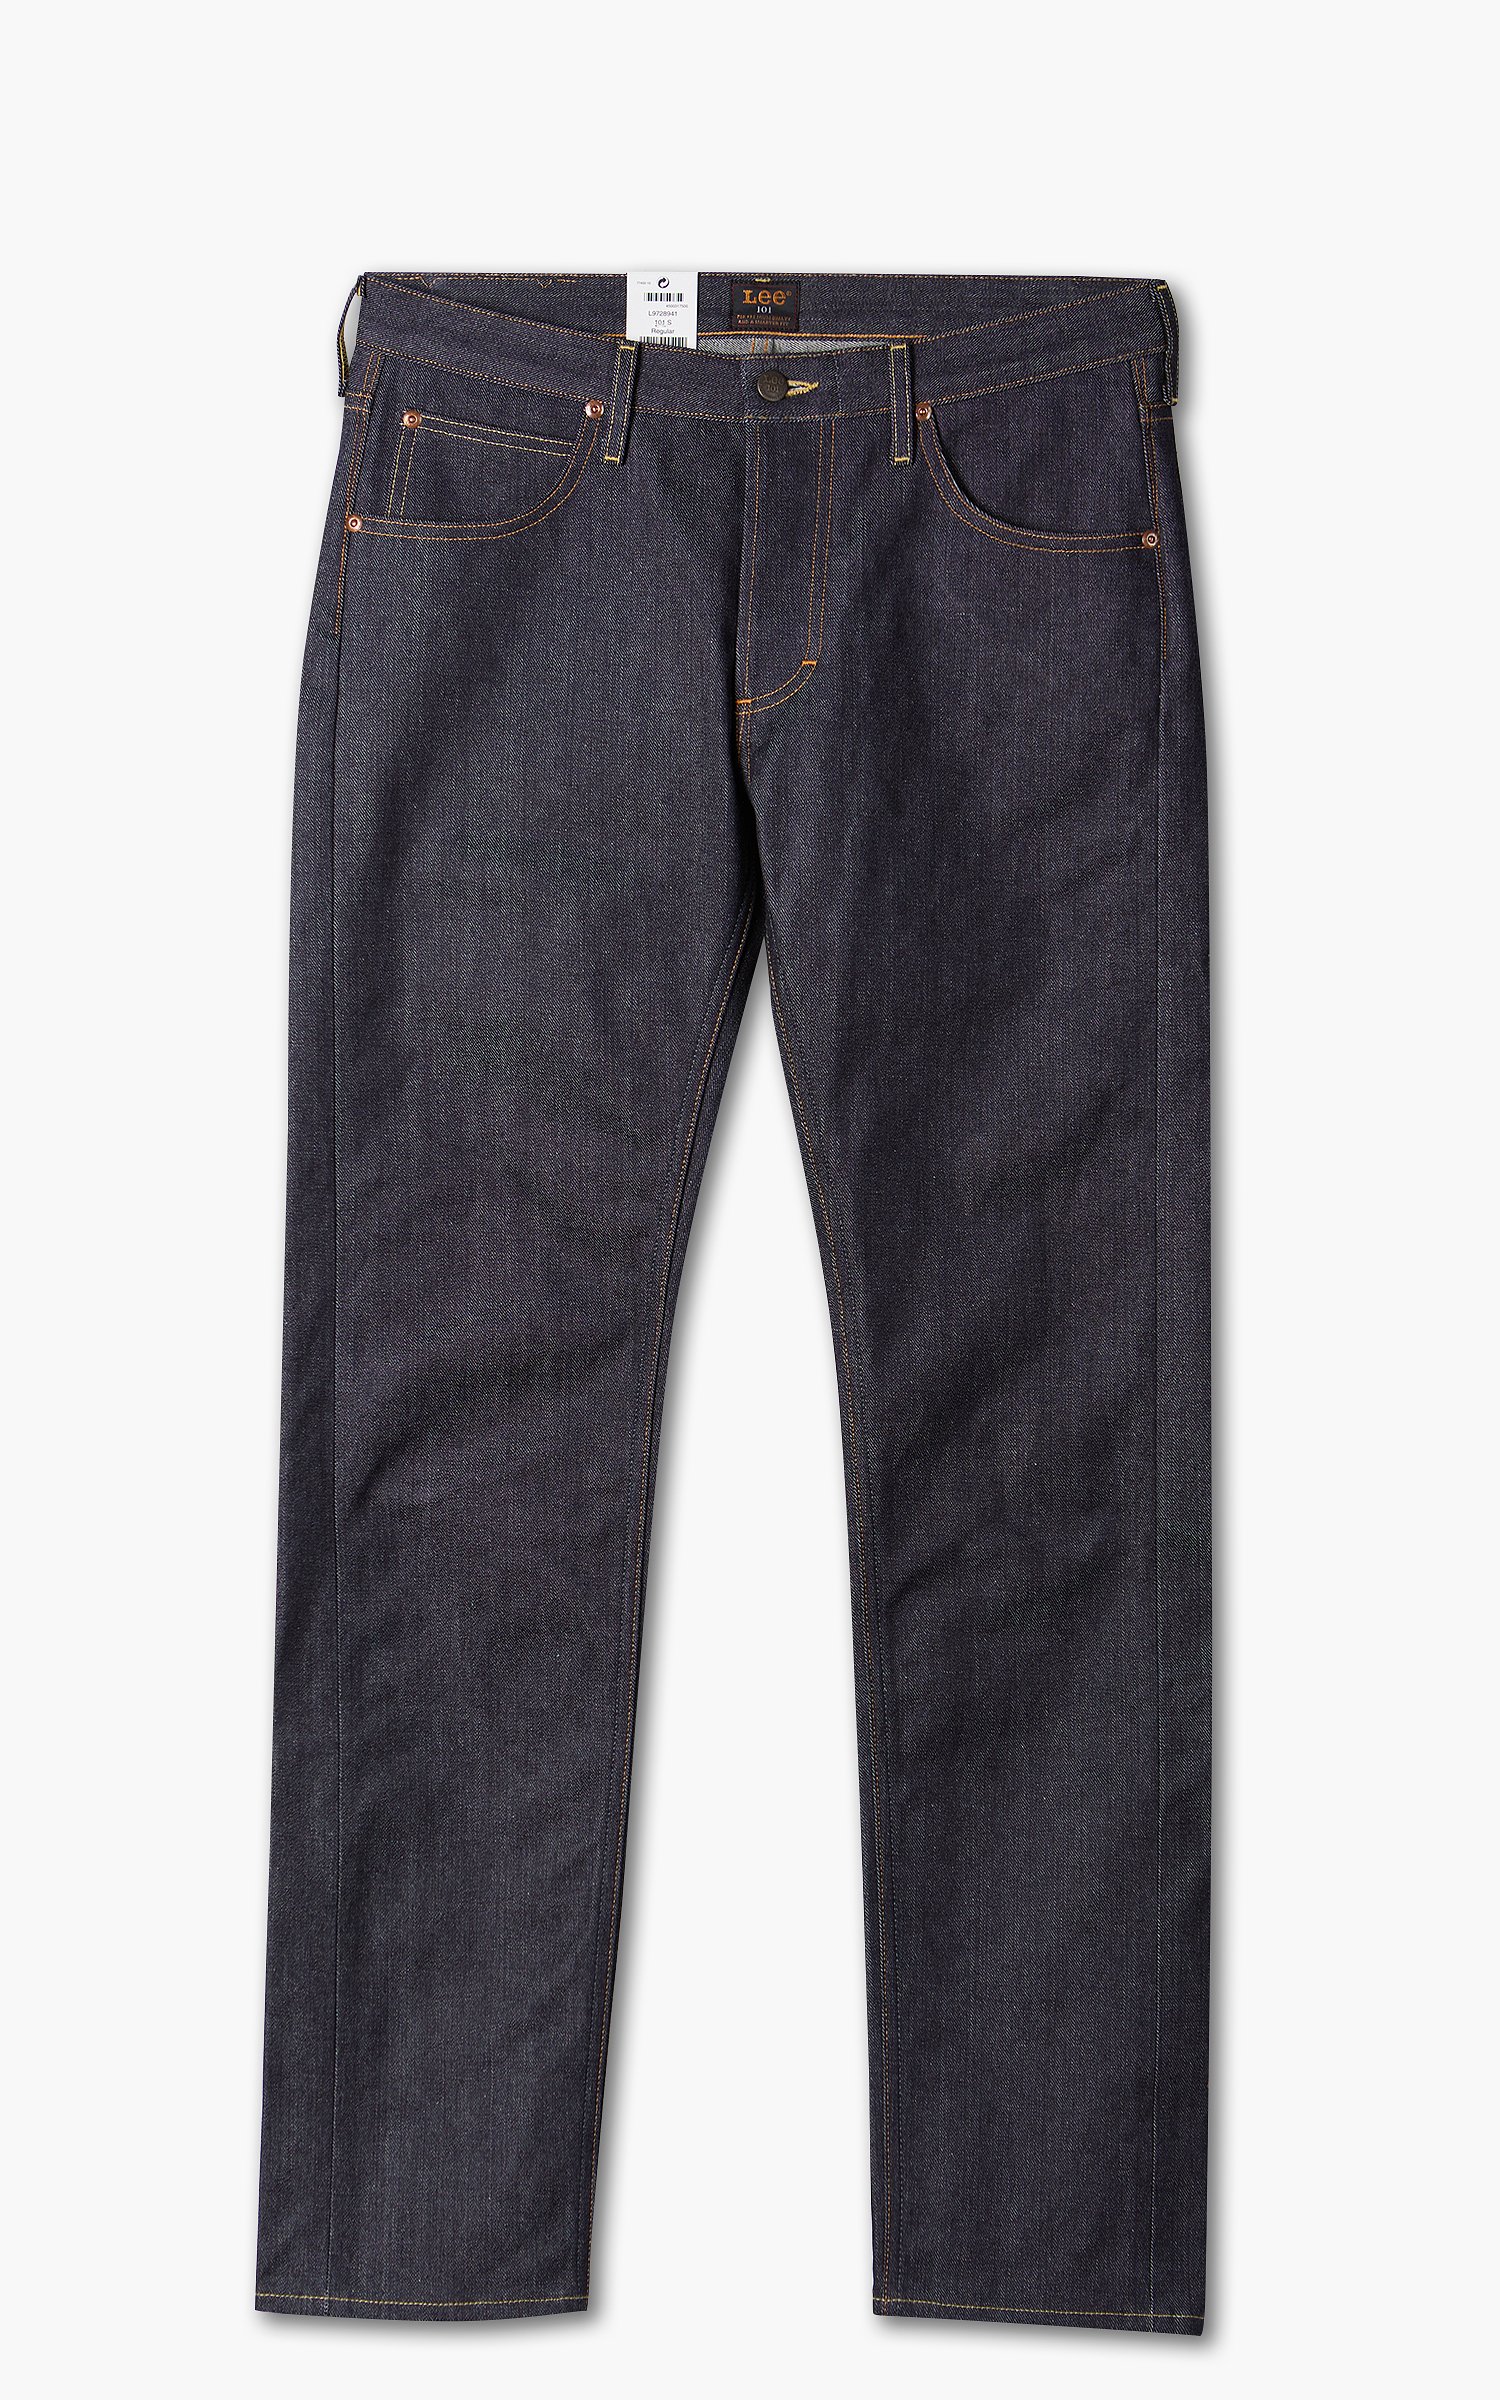 Lee 101 101 S Jeans Dry NS Recycled Cotton Selvedge |